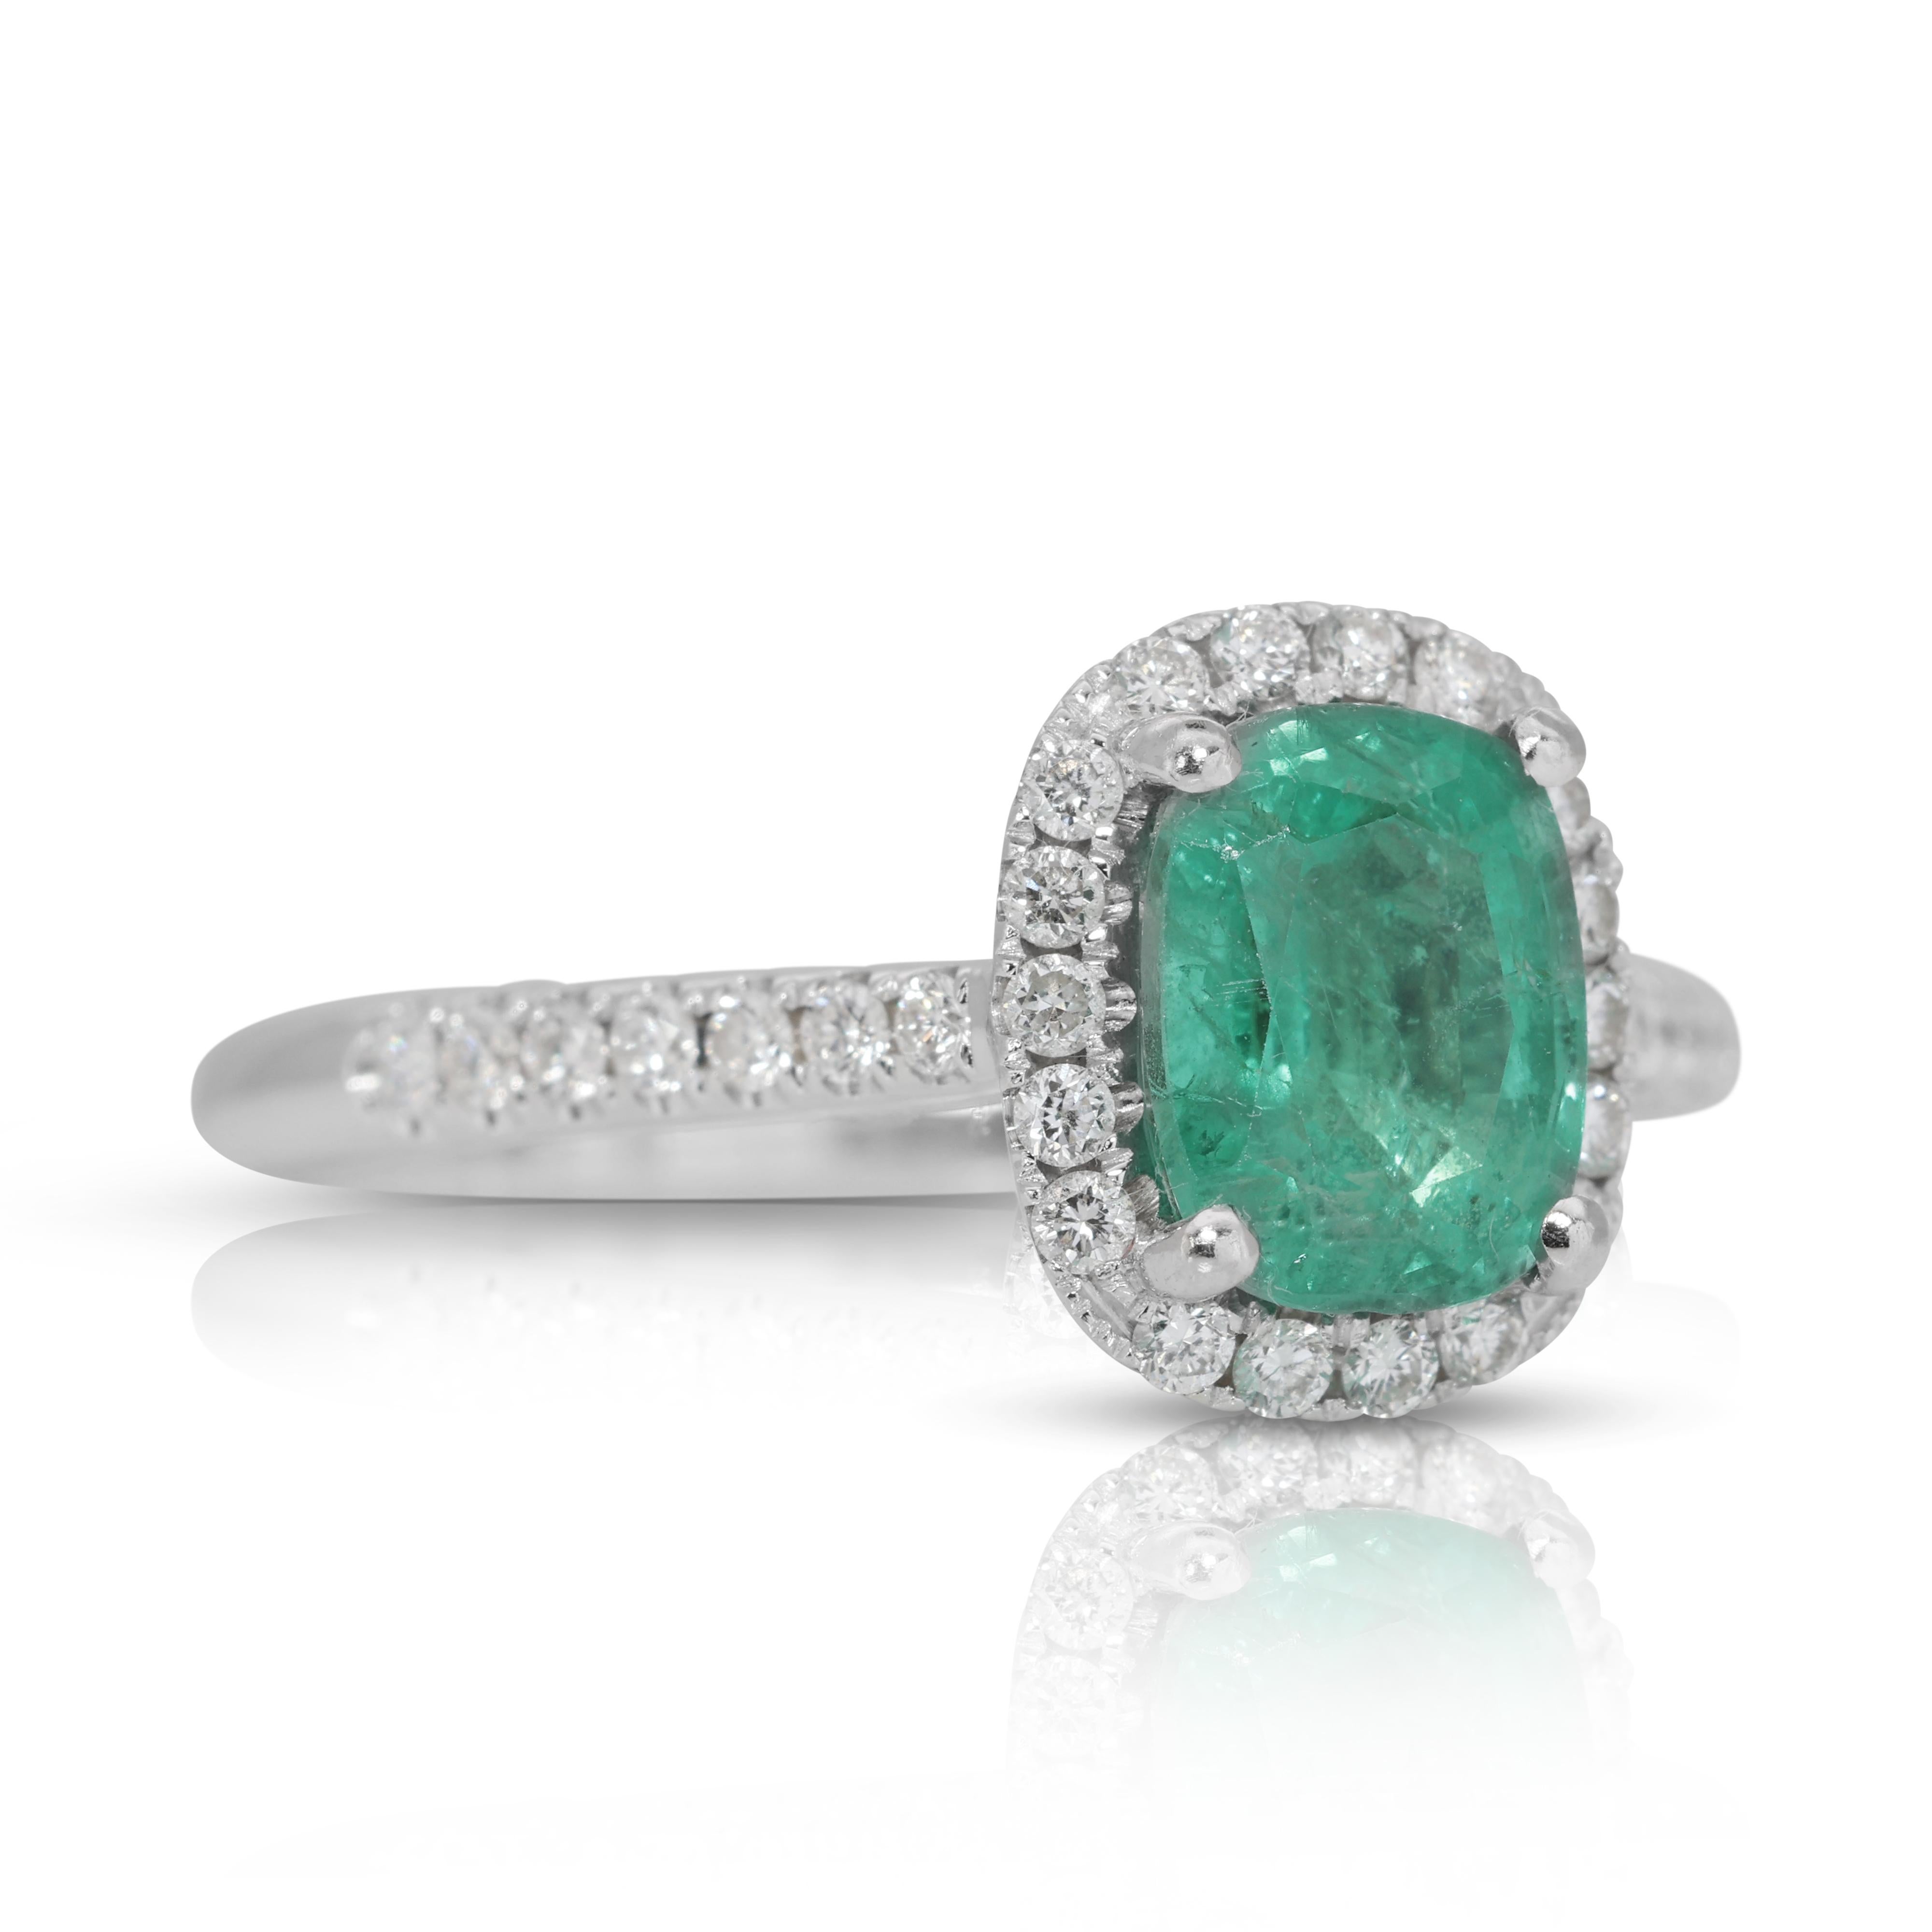 Enchanting 18k White Gold Cushion Emerald and Diamond Halo Ring w/2.10 ct - IGI Certified

Immerse yourself in the lush vibrancy of this exquisite 18k White Gold Halo Ring that captures the essence of nature's splendor. At its core, a mesmerizing